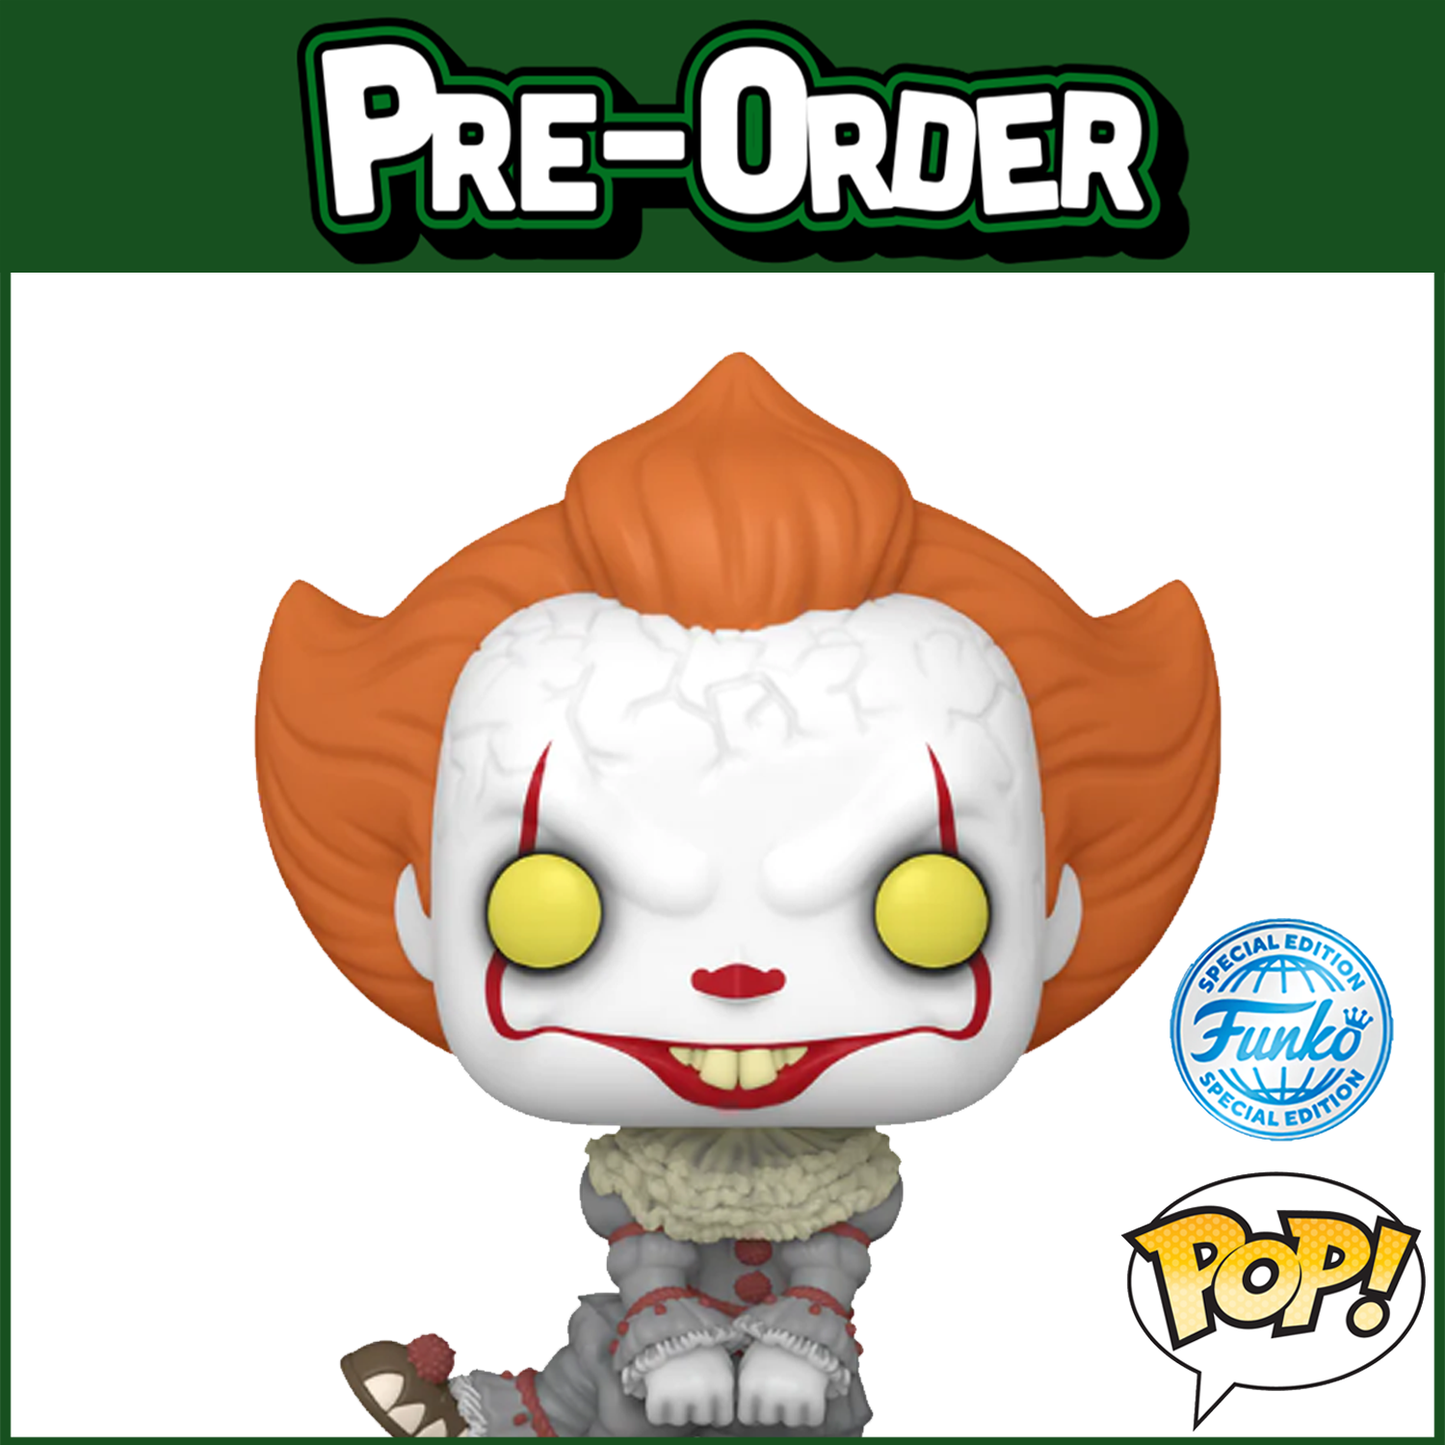 (PRE-ORDER) Funko POP! Movies: IT - Pennywise (FSE) #1437